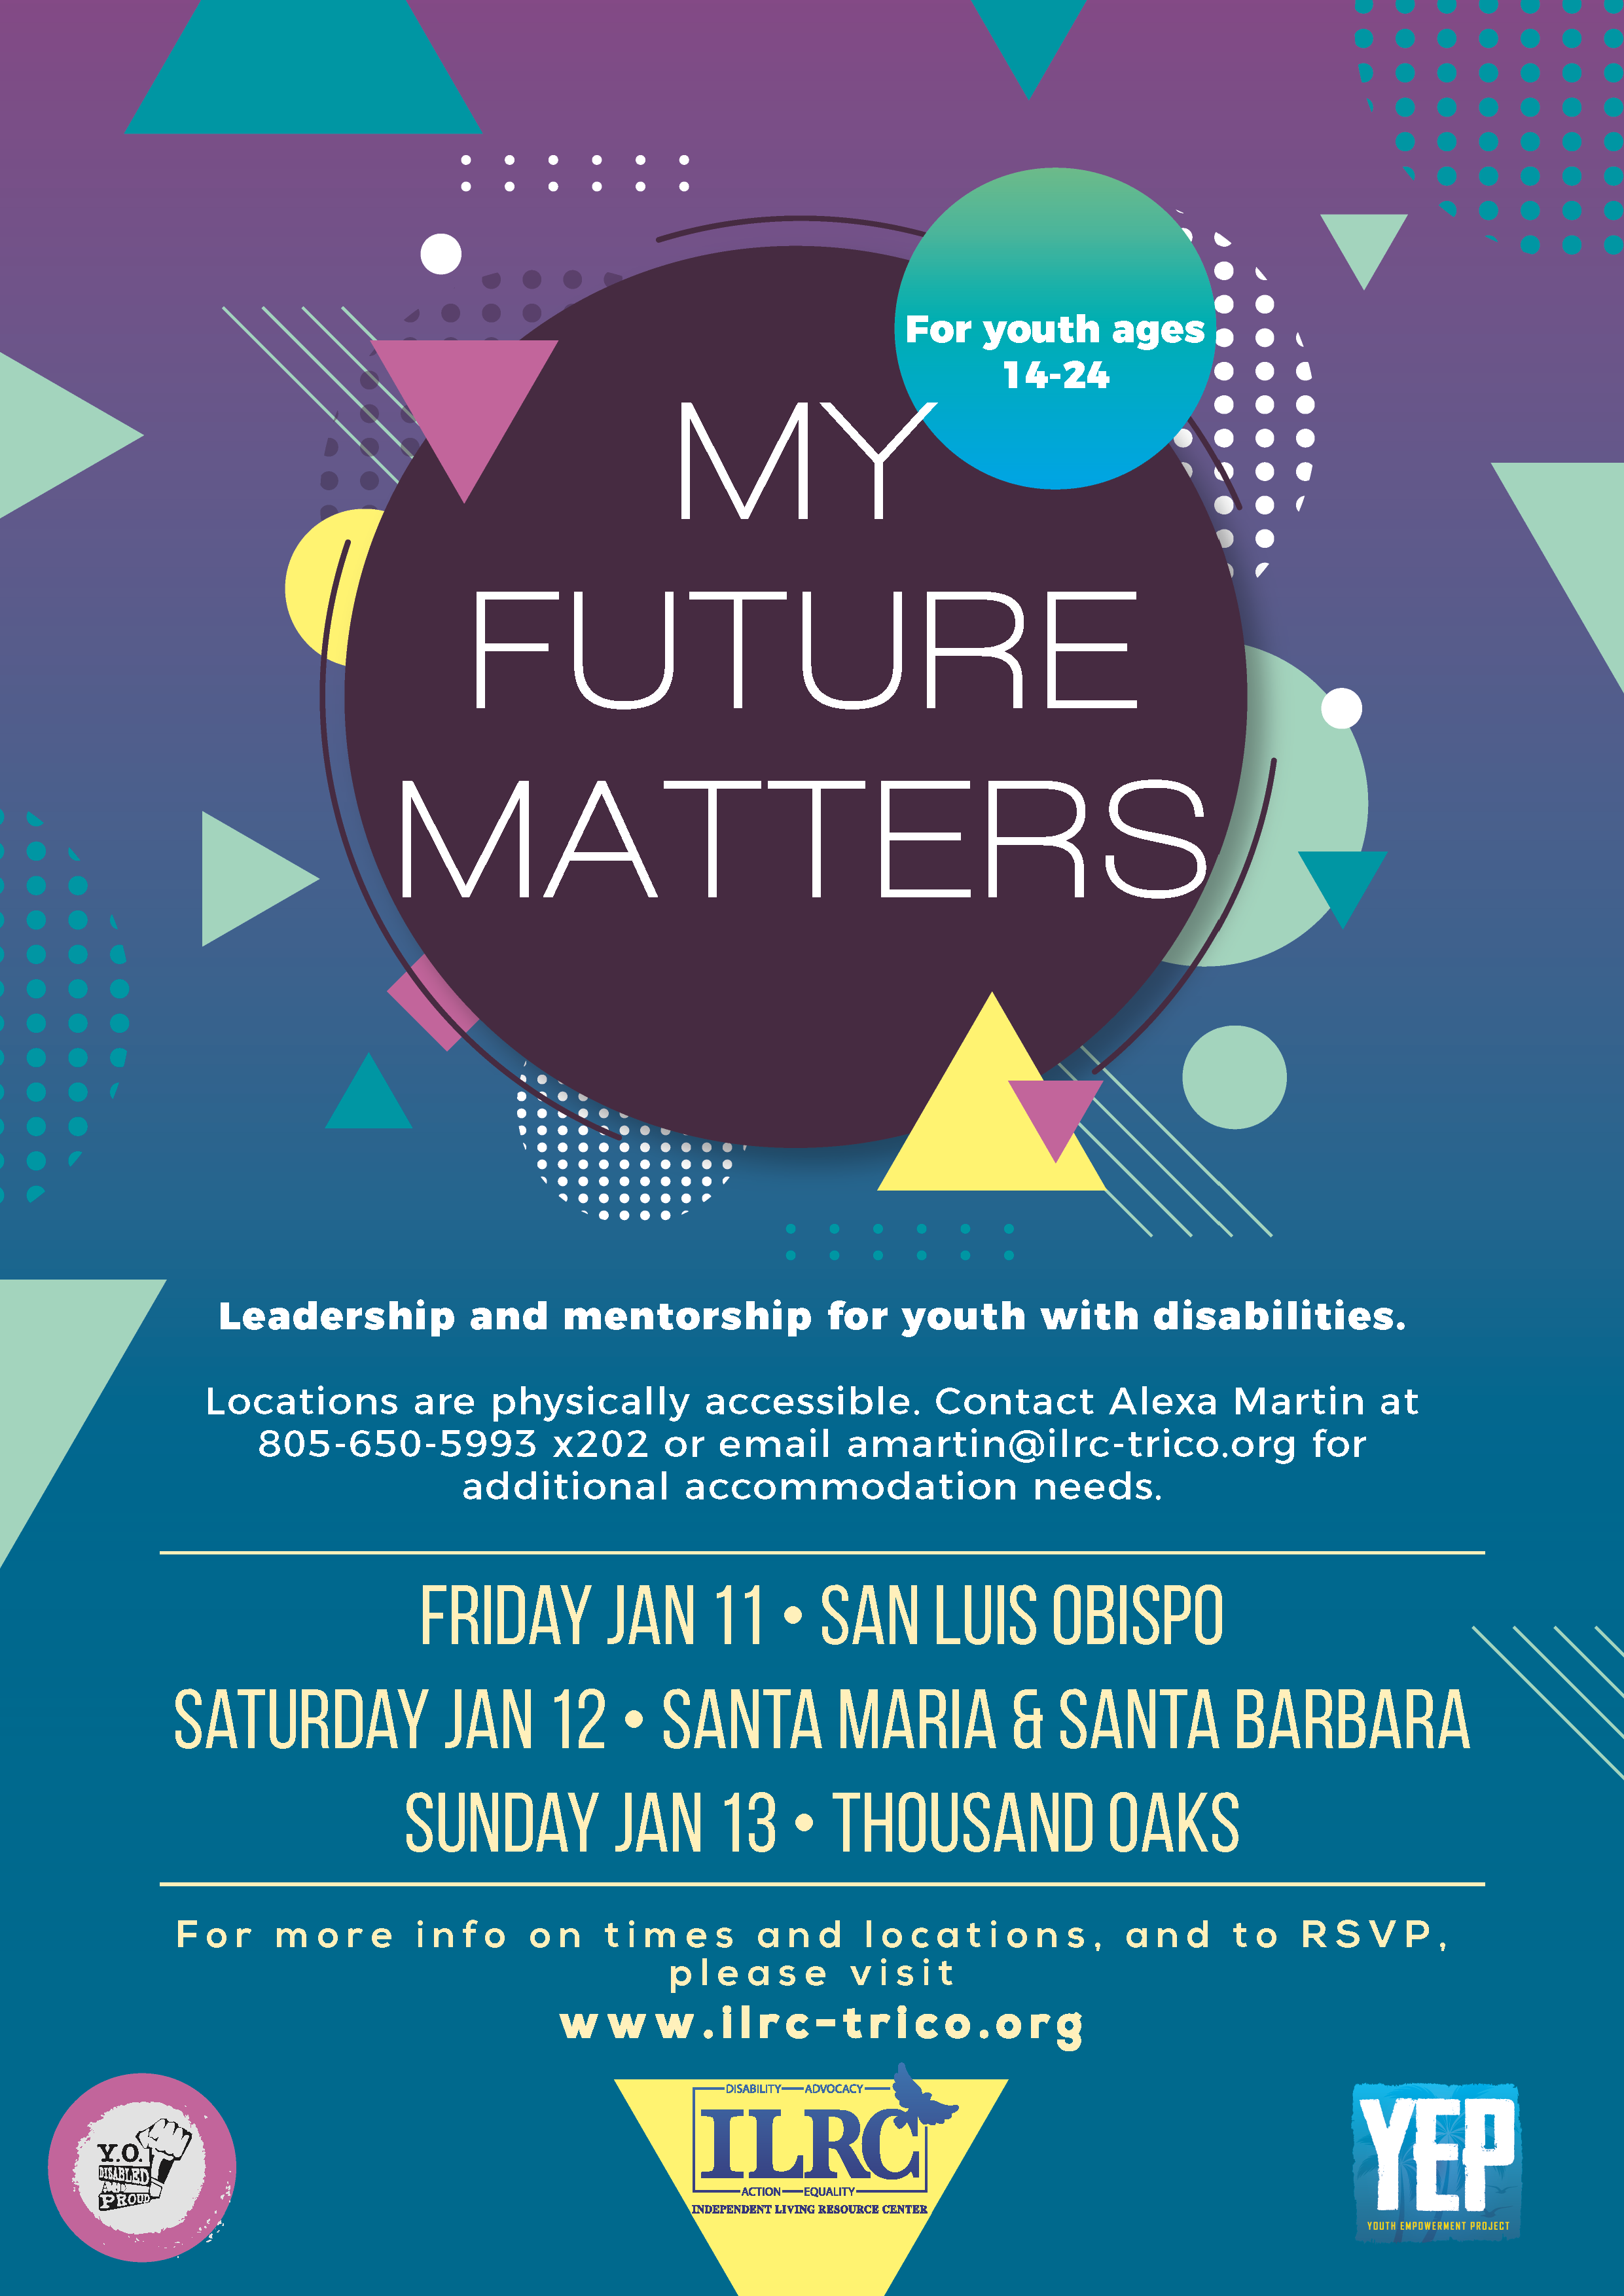 Flyer for My Future Matters done in a retro 80's design reading: For youth ages 14-24. MYFUTUREMATTERS.  Leadership and mentorship for youth with disabilities.Locations are physically accessible. Contact Alexa Martin at 805-650-5993 x202 or email amartin@ilrc-trico.org for additional accommodation needs. Friday Jan 11  San Luis Obispo Saturday Jan 12  Santa Maria & Santa Barbara Sunday Jan 13  Thousand Oaks For more info on times and locations, and to RSVP,please visitwww.ilrc-trico.org